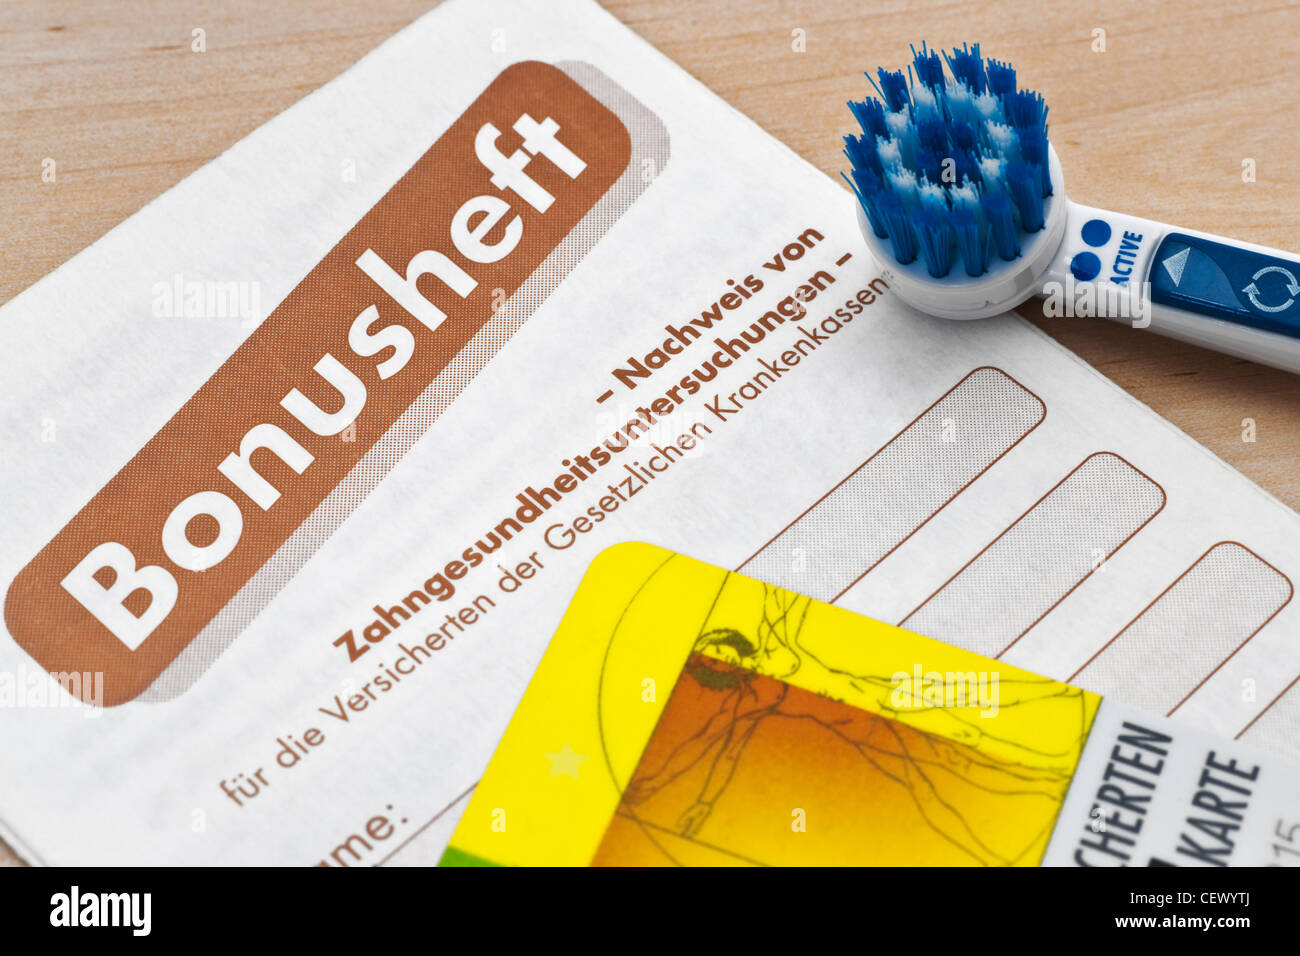 Detail photo of a dentist bonus booklet, a toothbrush and a health insurance card alongside Stock Photo